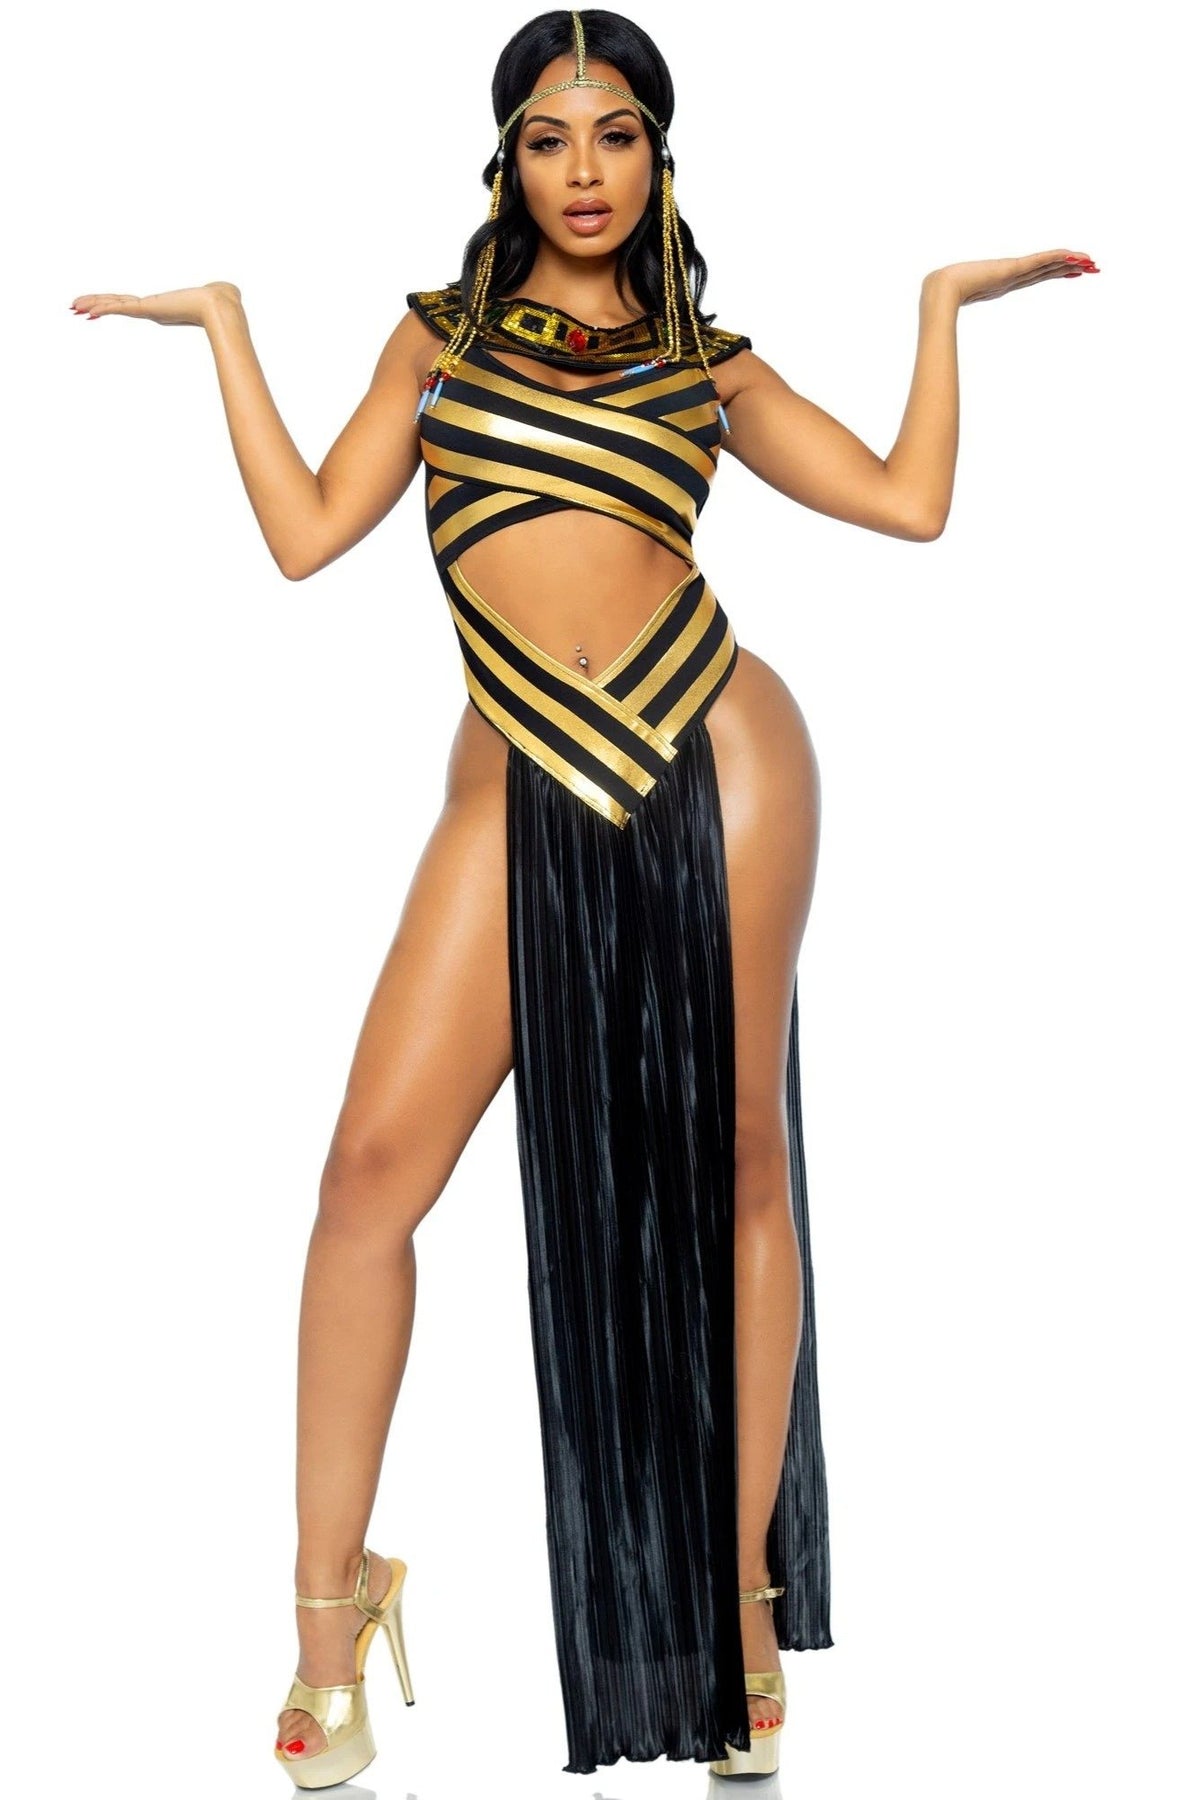 Model wearing black and gold cleopatra costume